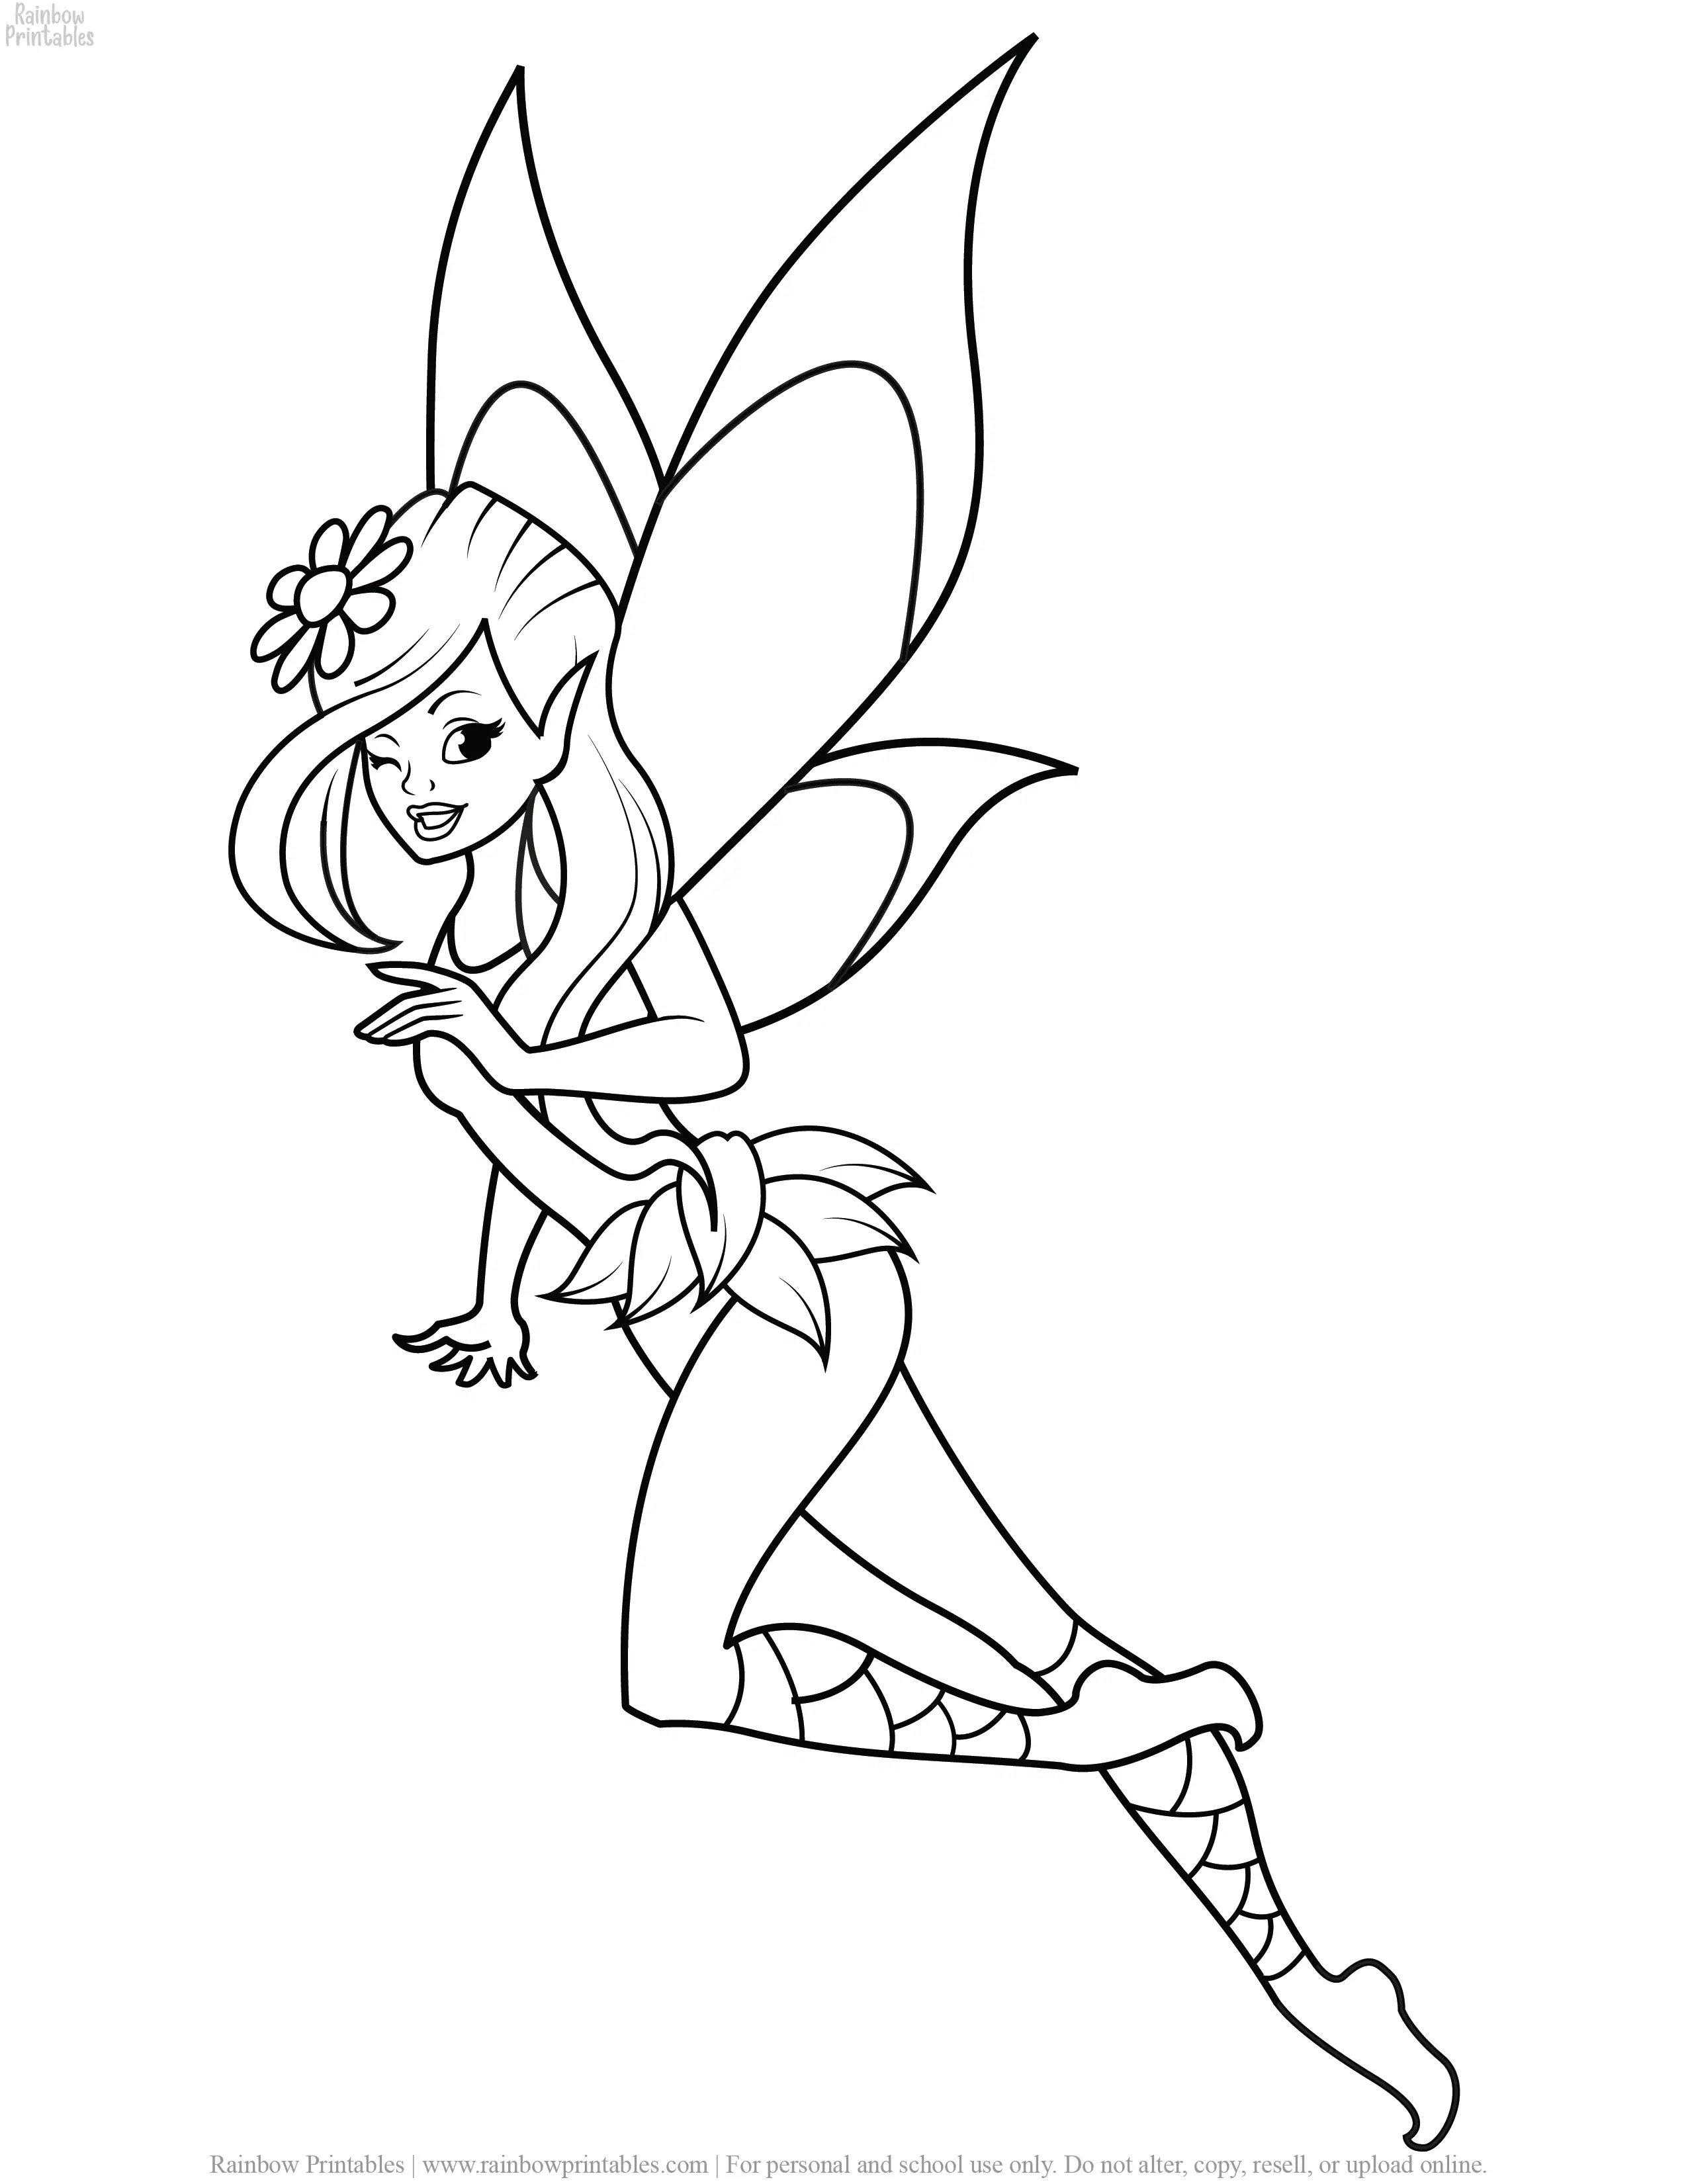 FREE BEAUTIFUL CARTOON FAIRY COLORING PAGES FOR GIRLS PRINTABLE ACTIVITY